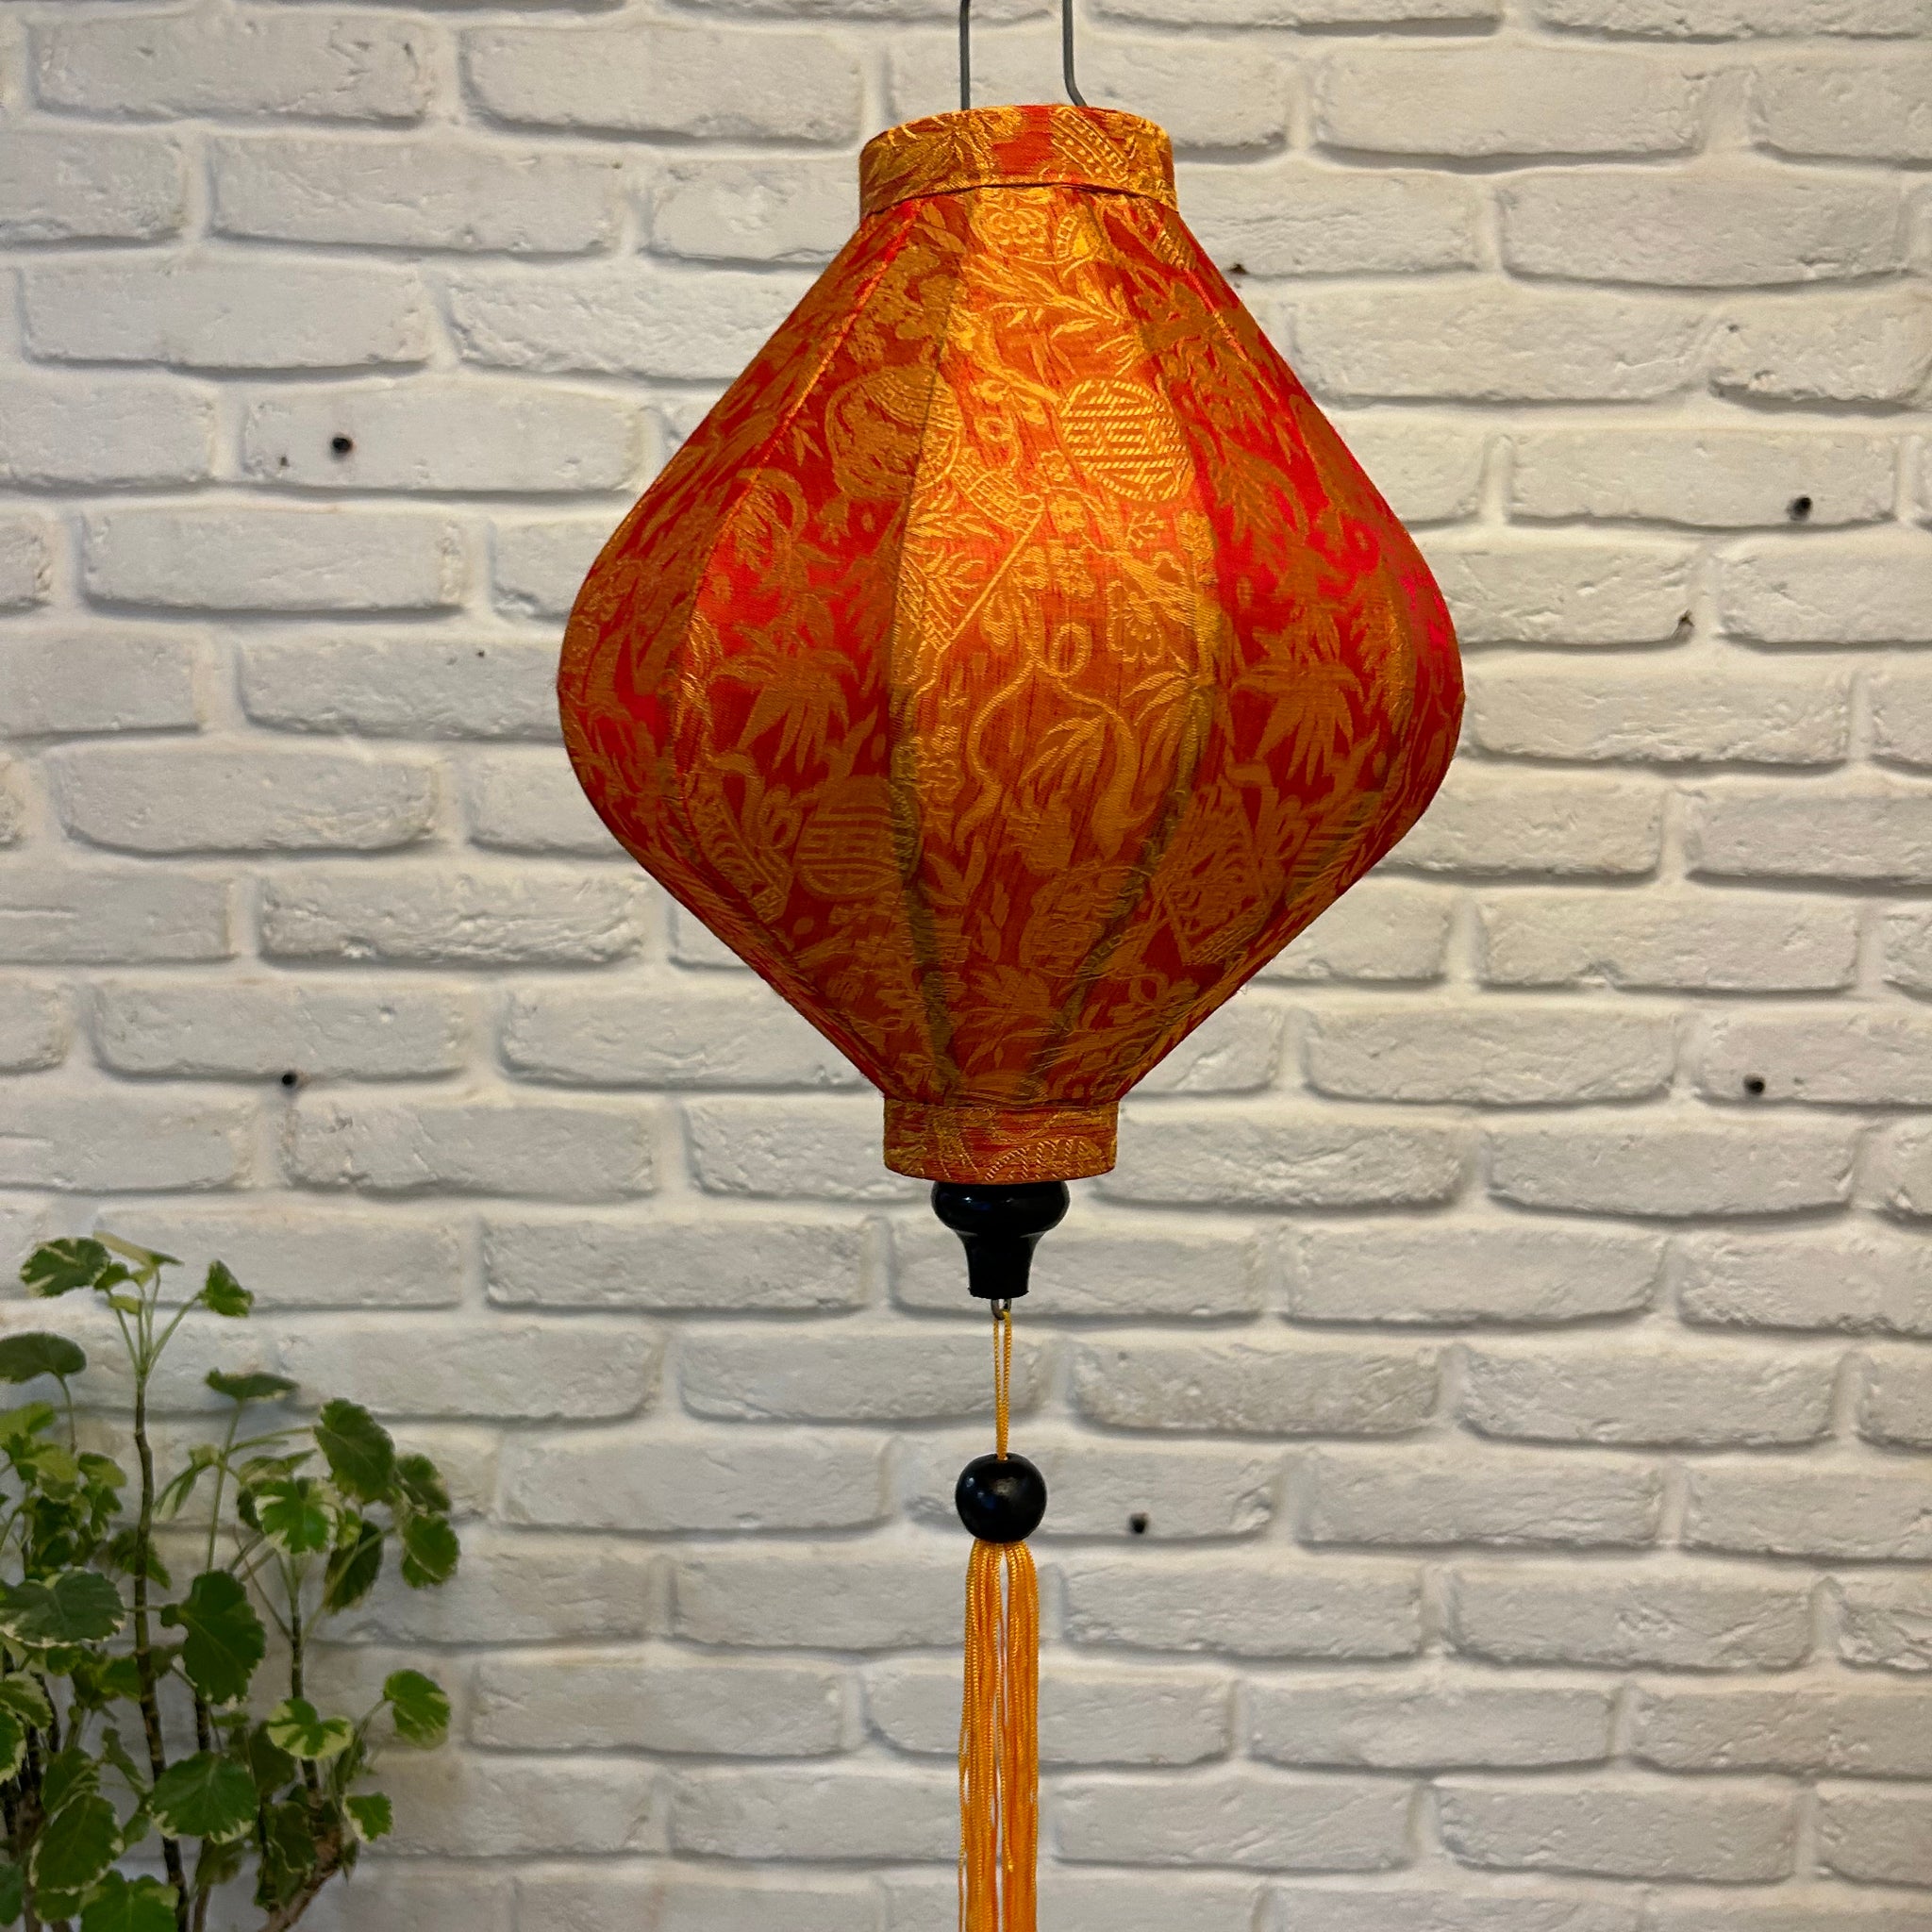 Buy Best Lampshade for your Dream Home & Garden  Asian-inspired décor, Authentic Vietnamese artwork, Bamboo frame lanterns, Celebration dinner décor, Culture-infused textures, Deep green and red lanterns, Drop-shaped lanterns, Folding technique lanterns,	 Hand-painted lanterns, Home decor lanterns, Premium silk lanterns, Restaurant décor, Silk lantern décor, Vietnamese silk lanterns, Wedding lanterns, TESU